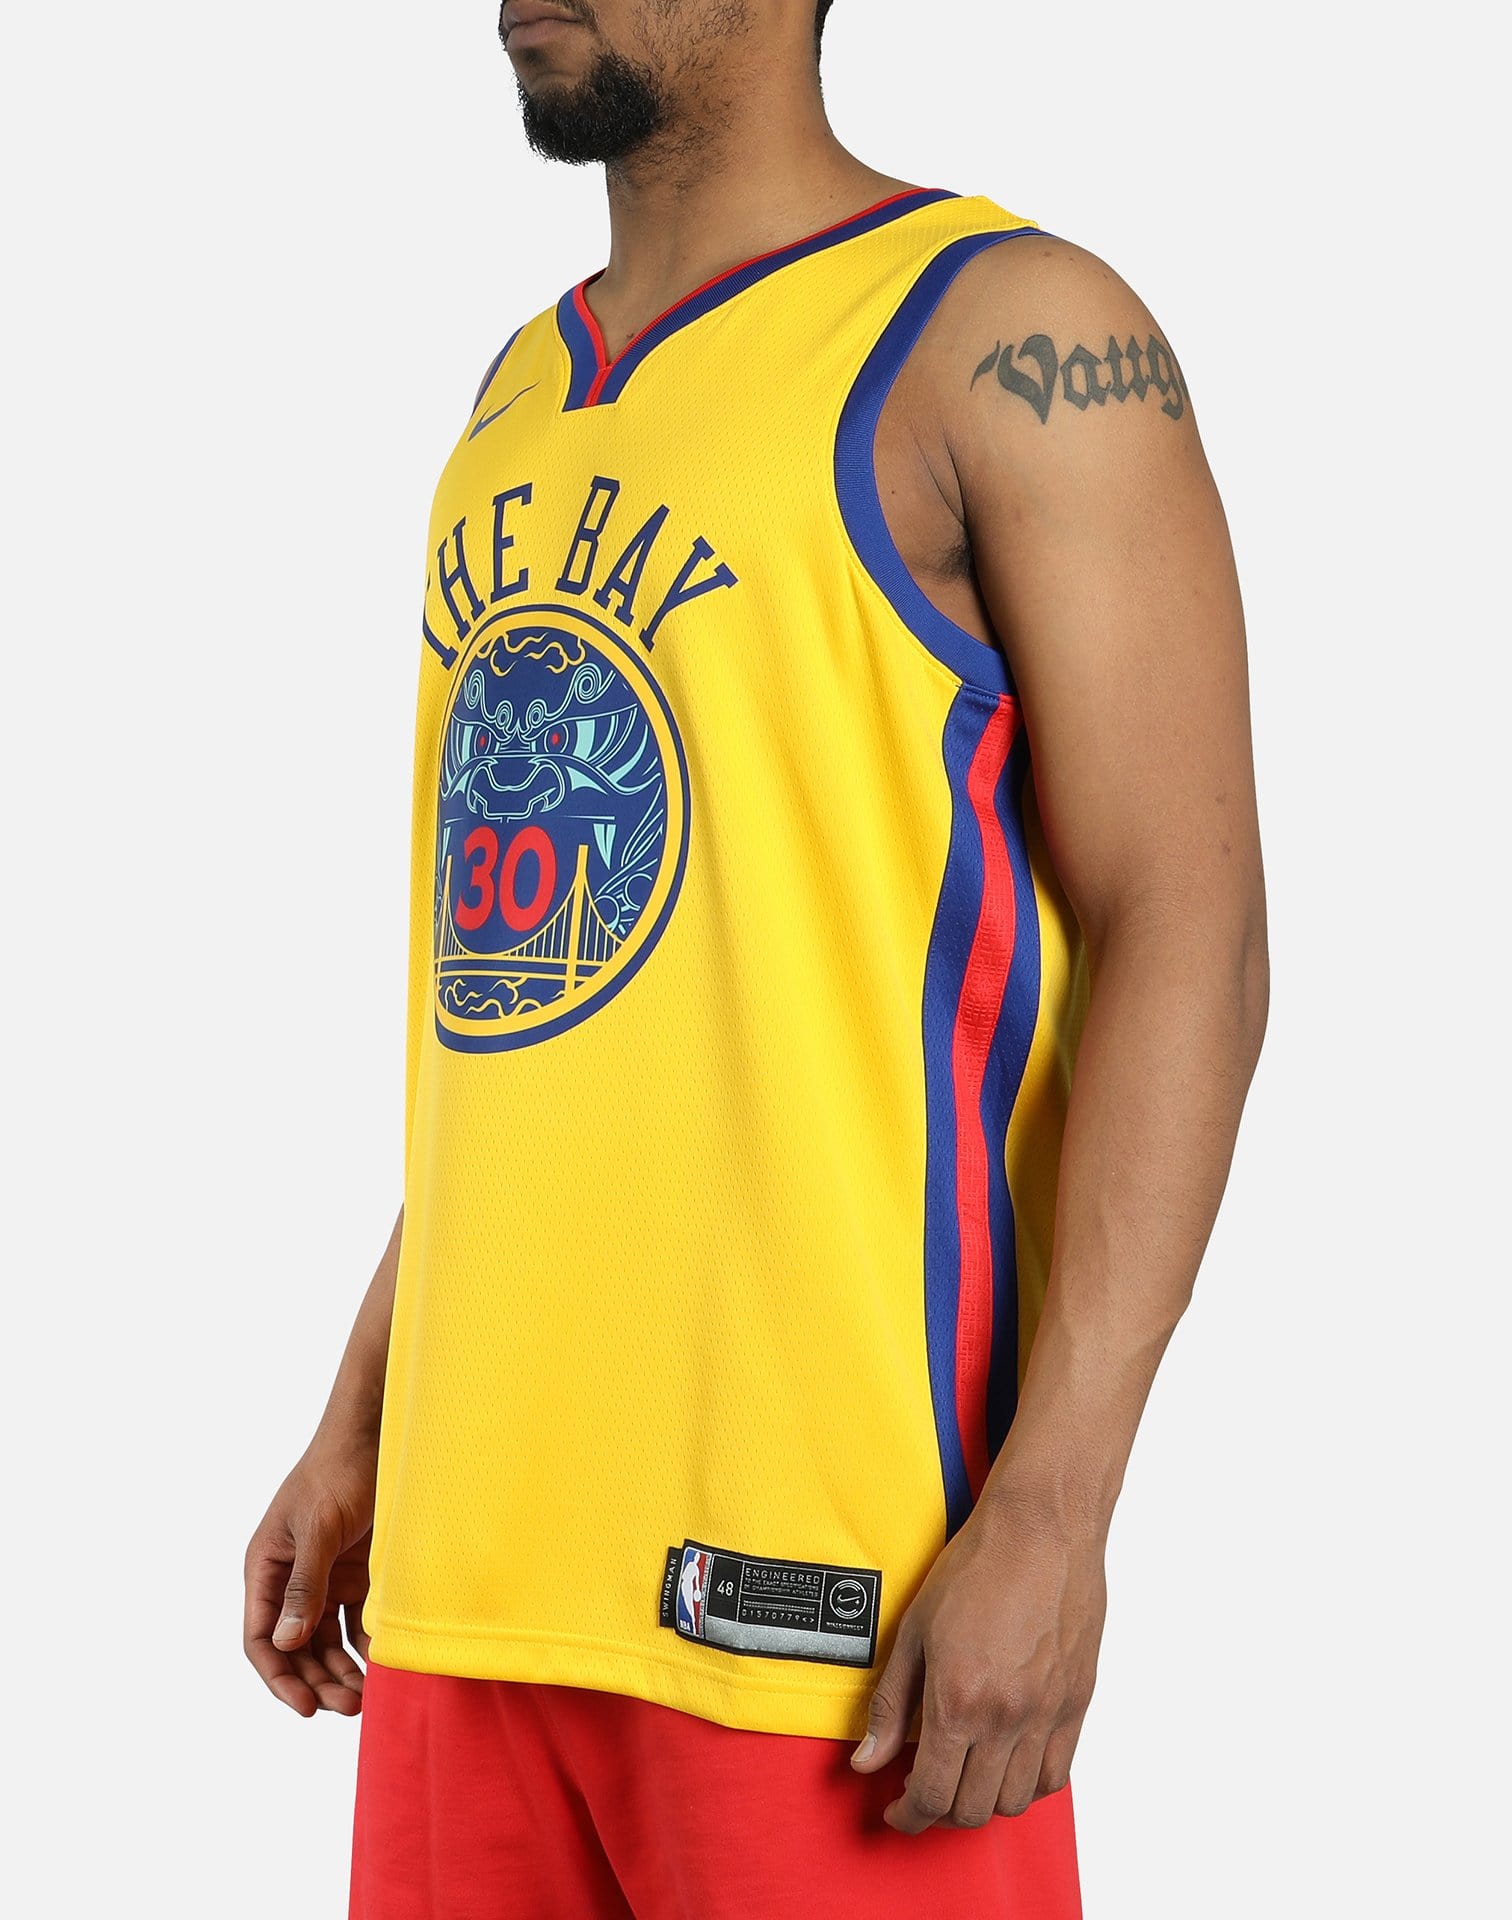 Stephen Curry Golden State Warriors City Edition Oakland Jersey